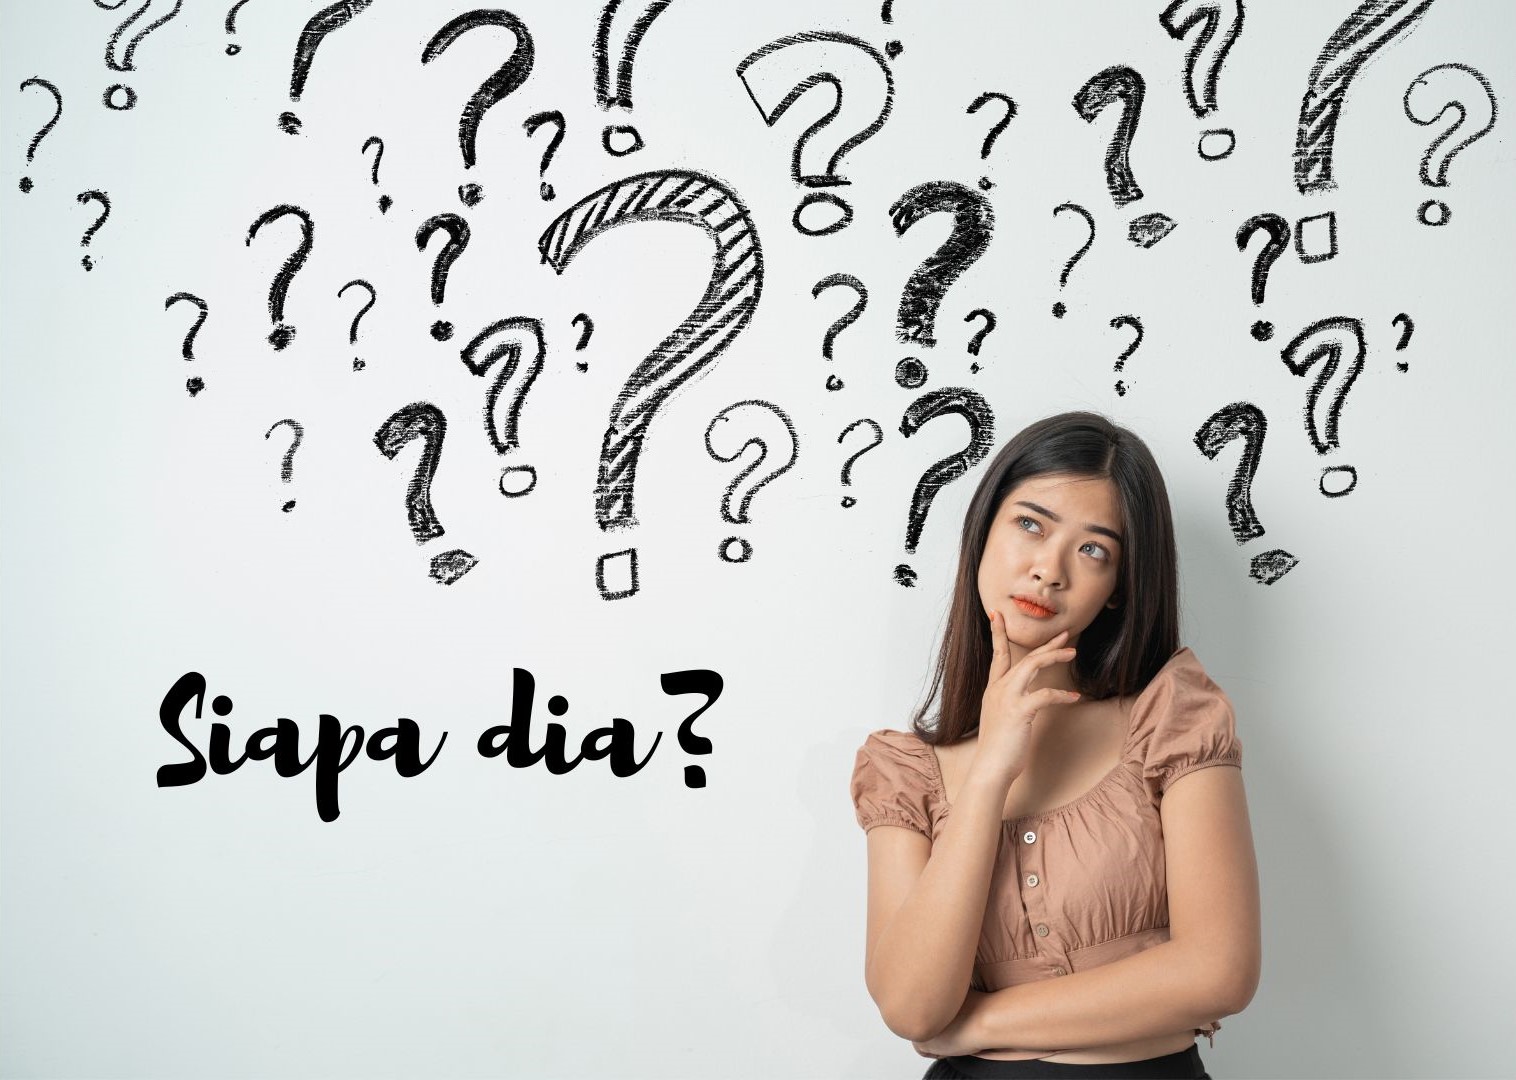 Common Indonesian Questions